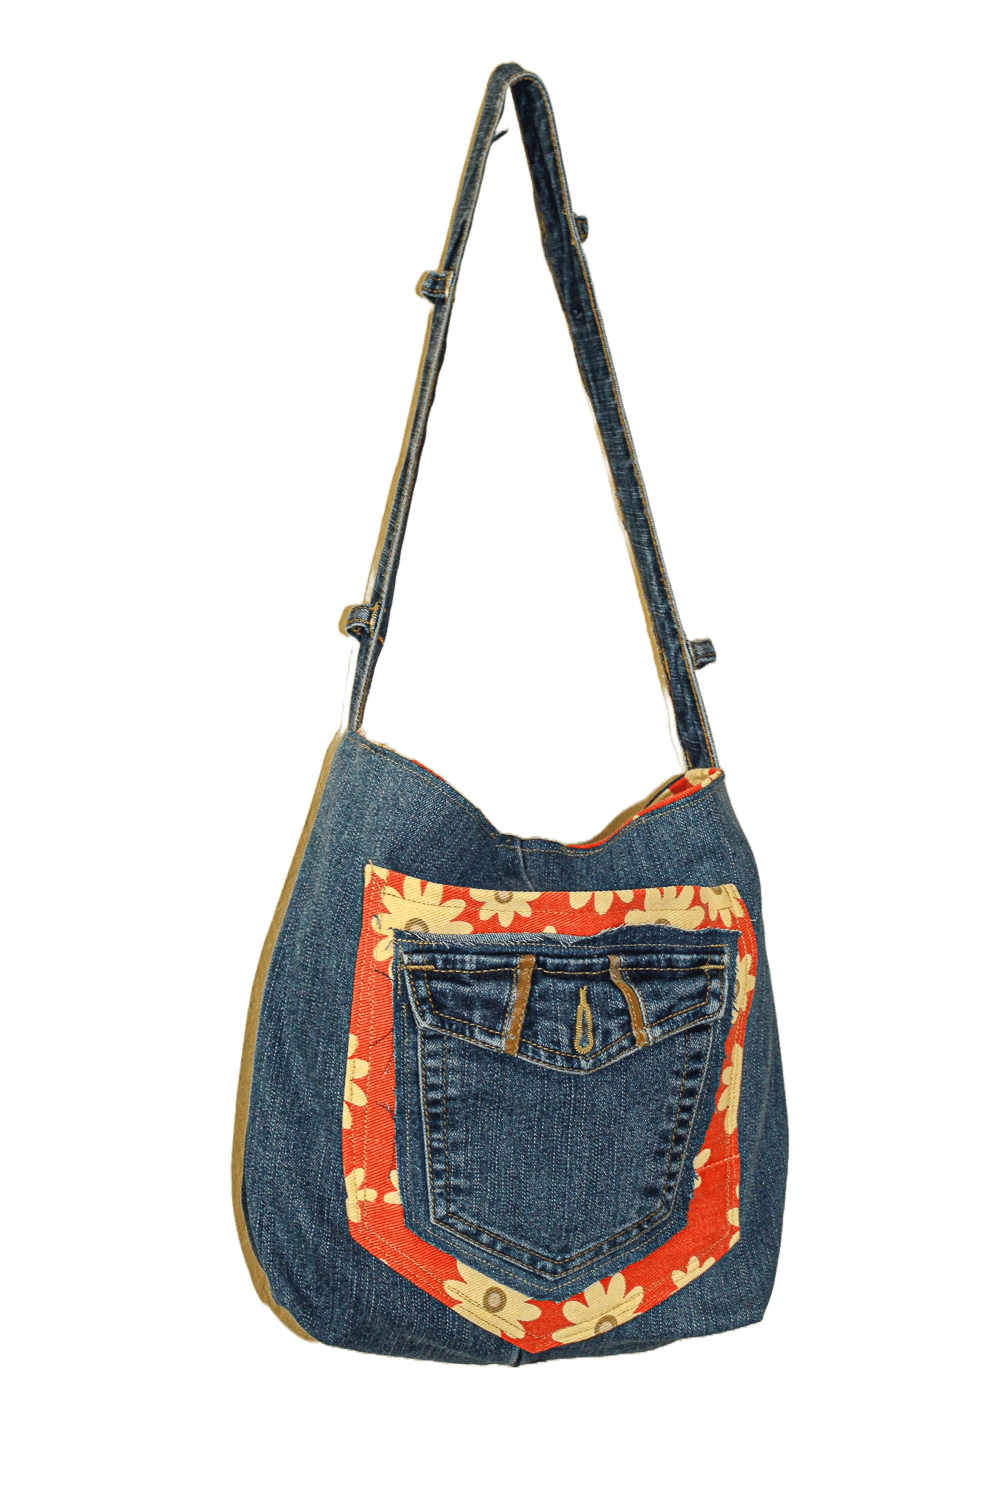 The Donna Bag